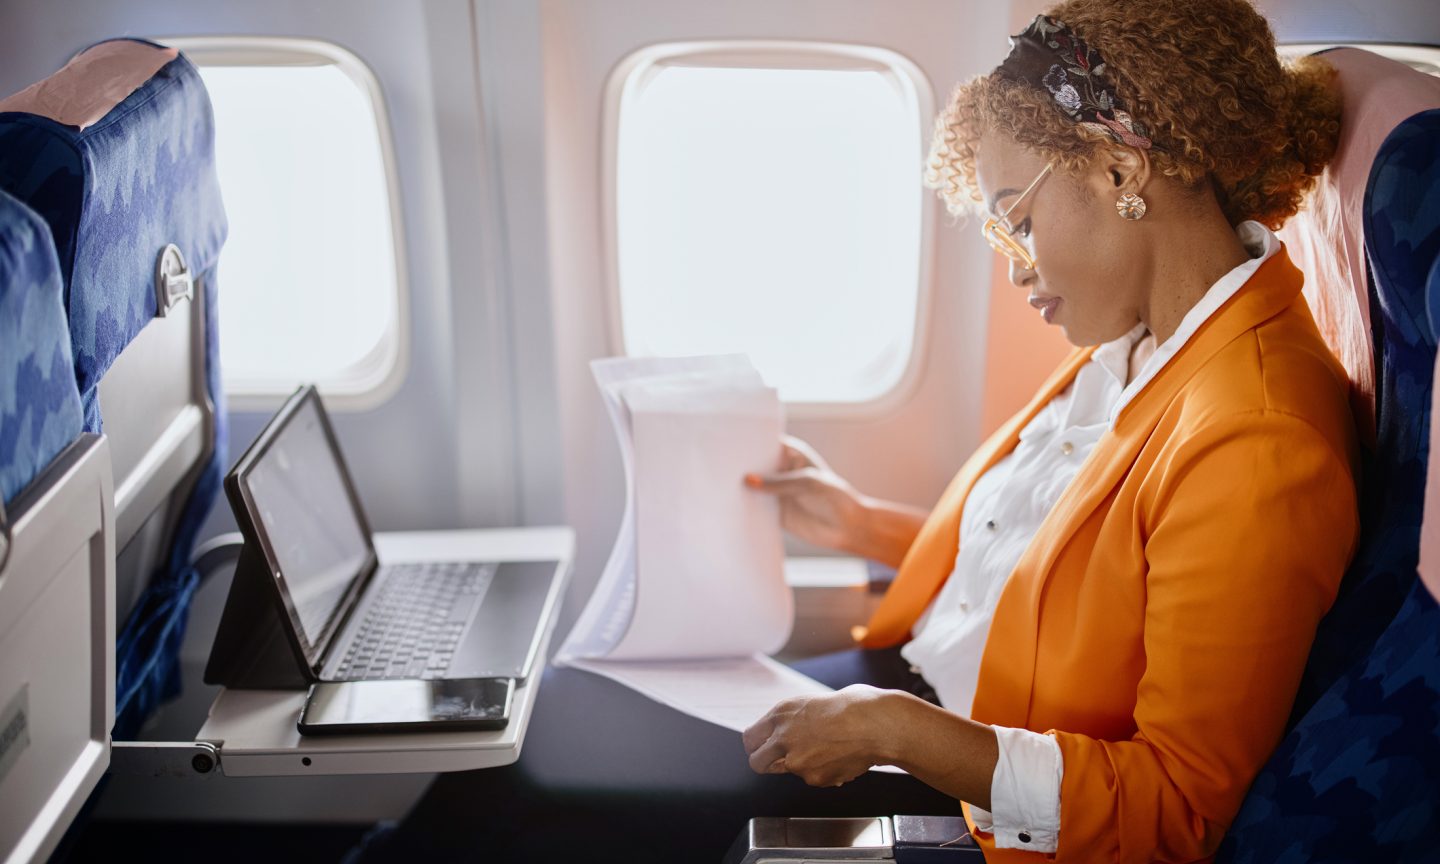 Air France Wi-Fi: What to Know – NerdWallet